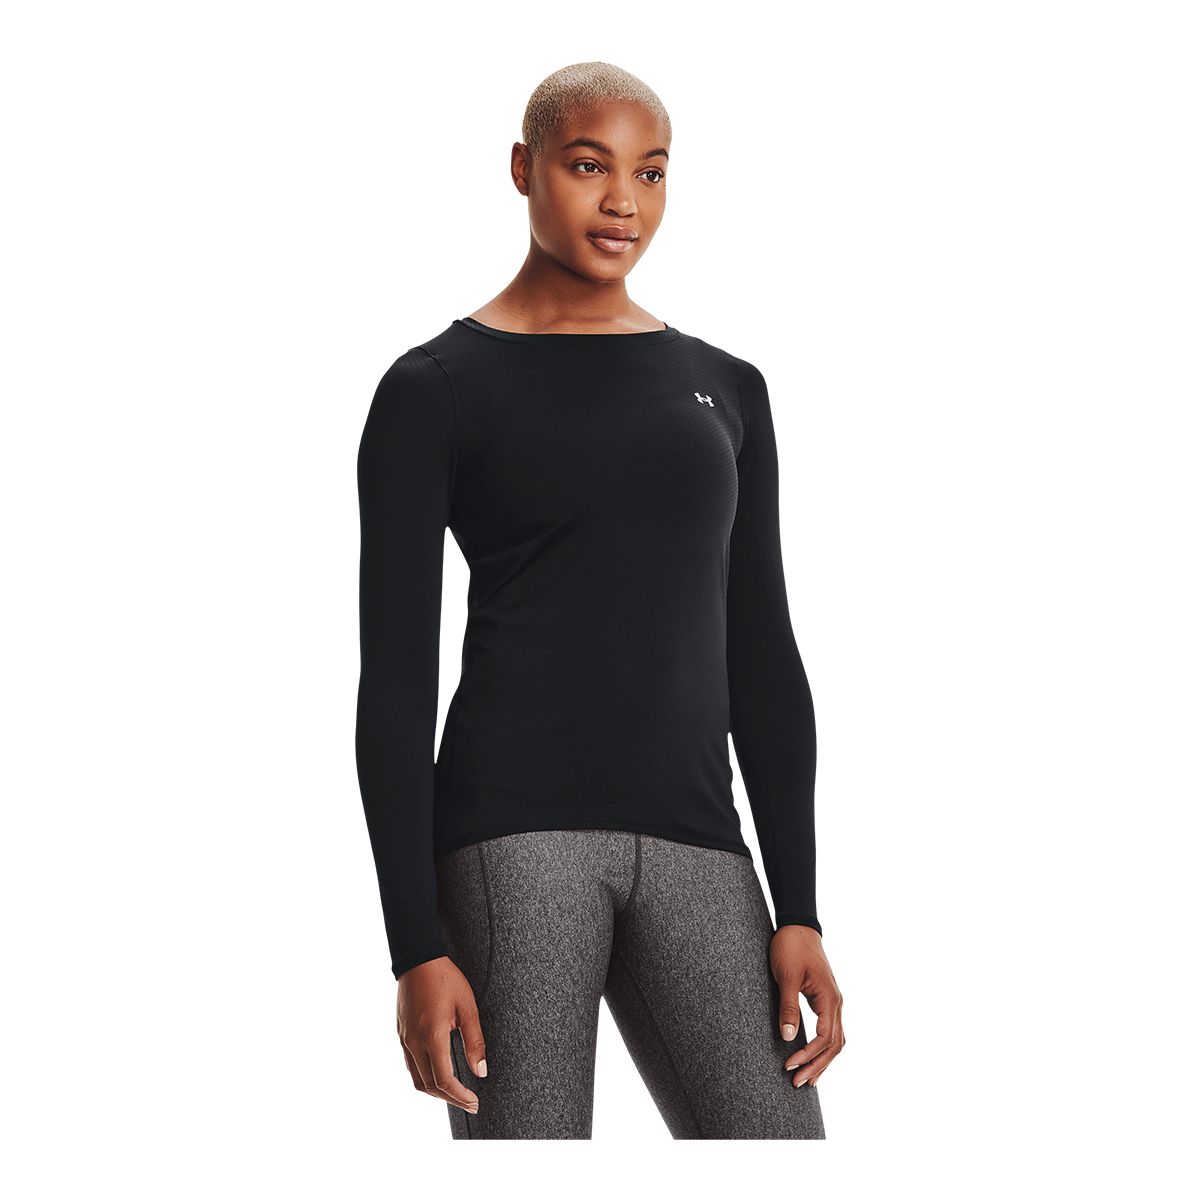 Under Armour Mens Ua Hg Baselayer Top Compression Armor Thermal Skins